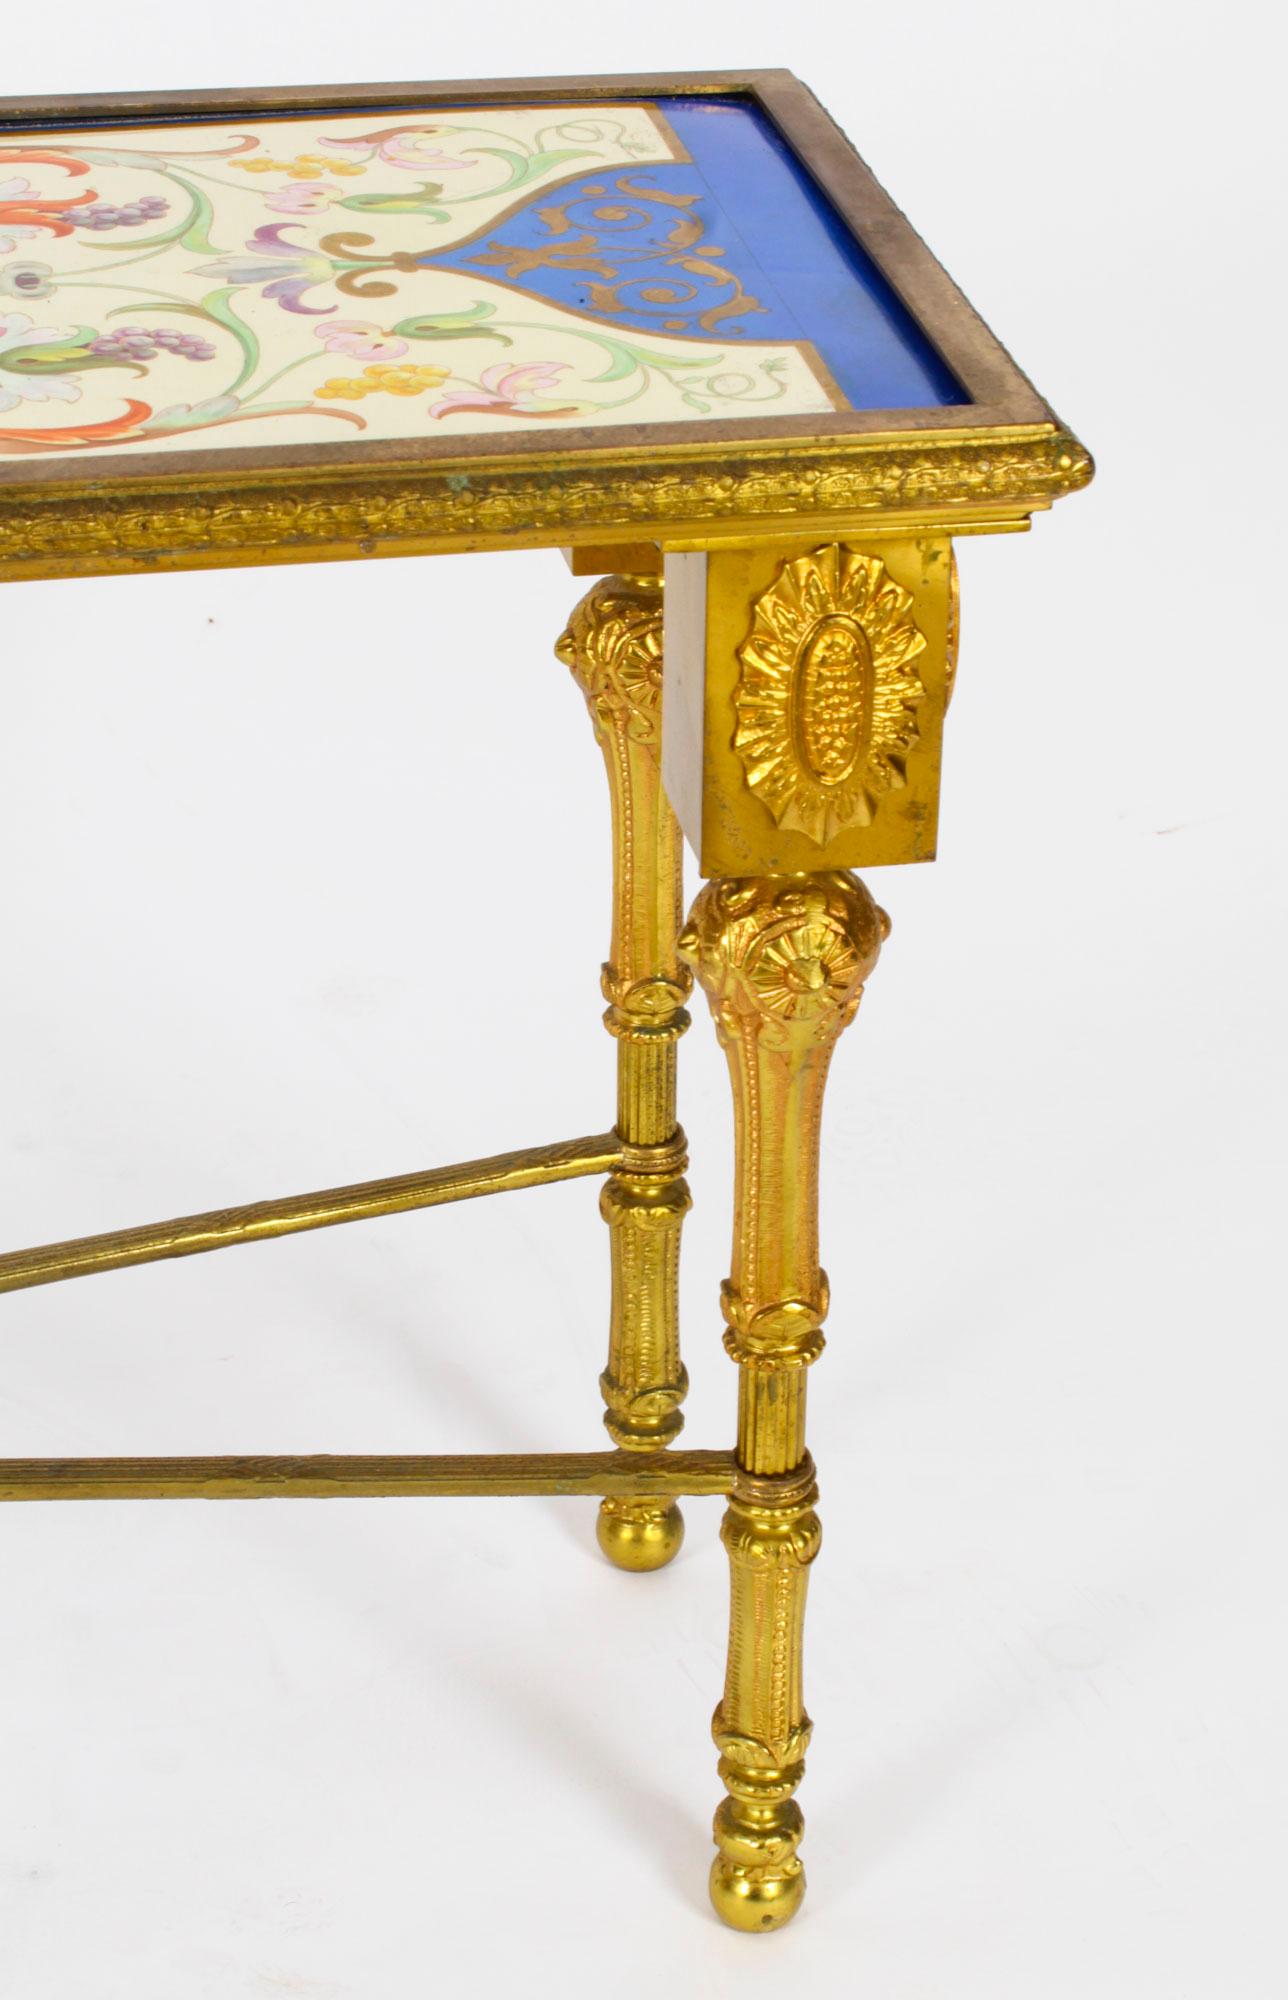 Antique Regency Revival Ormolu Mounted Table Display Stand Late 19th C 4